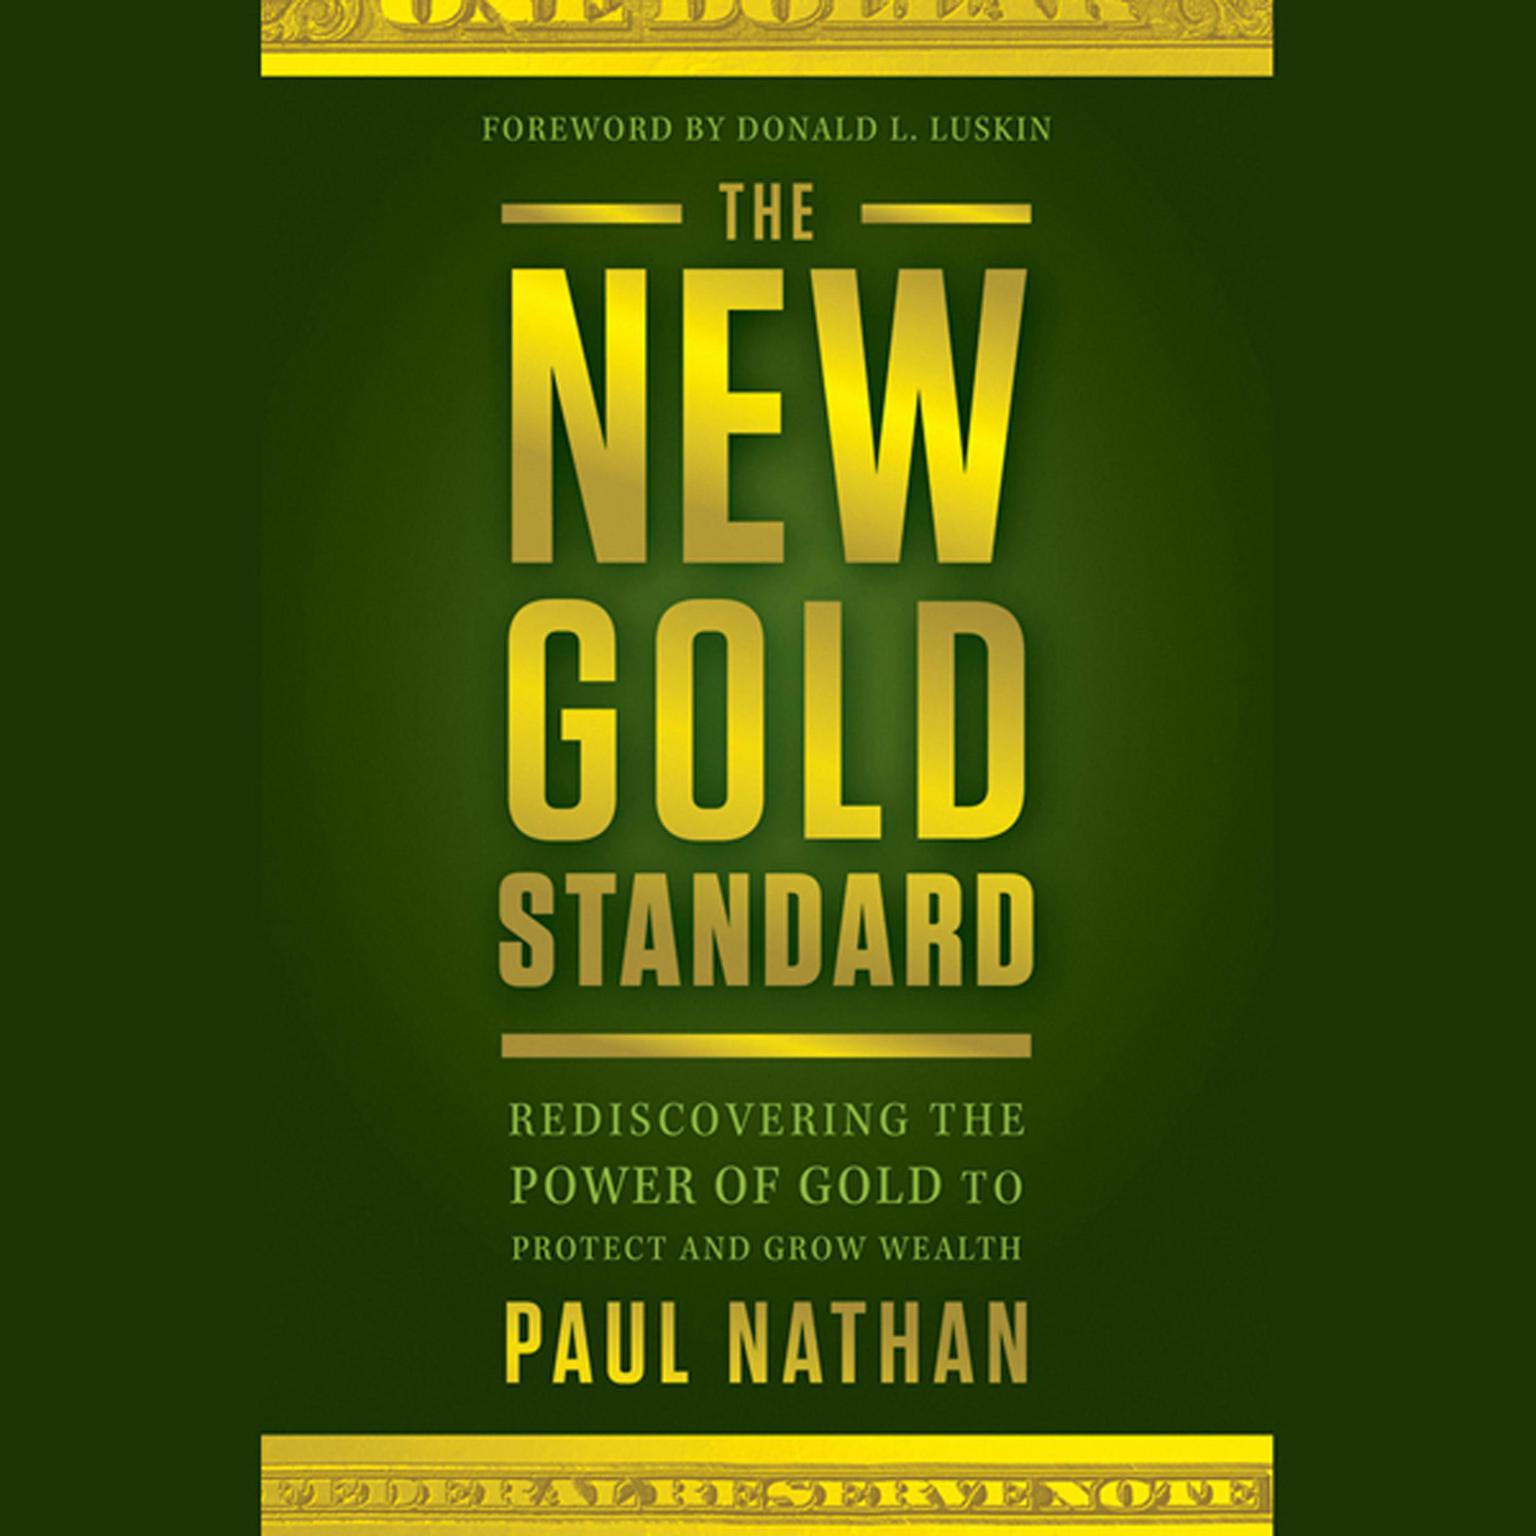 The New Gold Standard: Rediscovering the Power of Gold to Protect and Grow Wealth Audiobook, by Paul Nathan